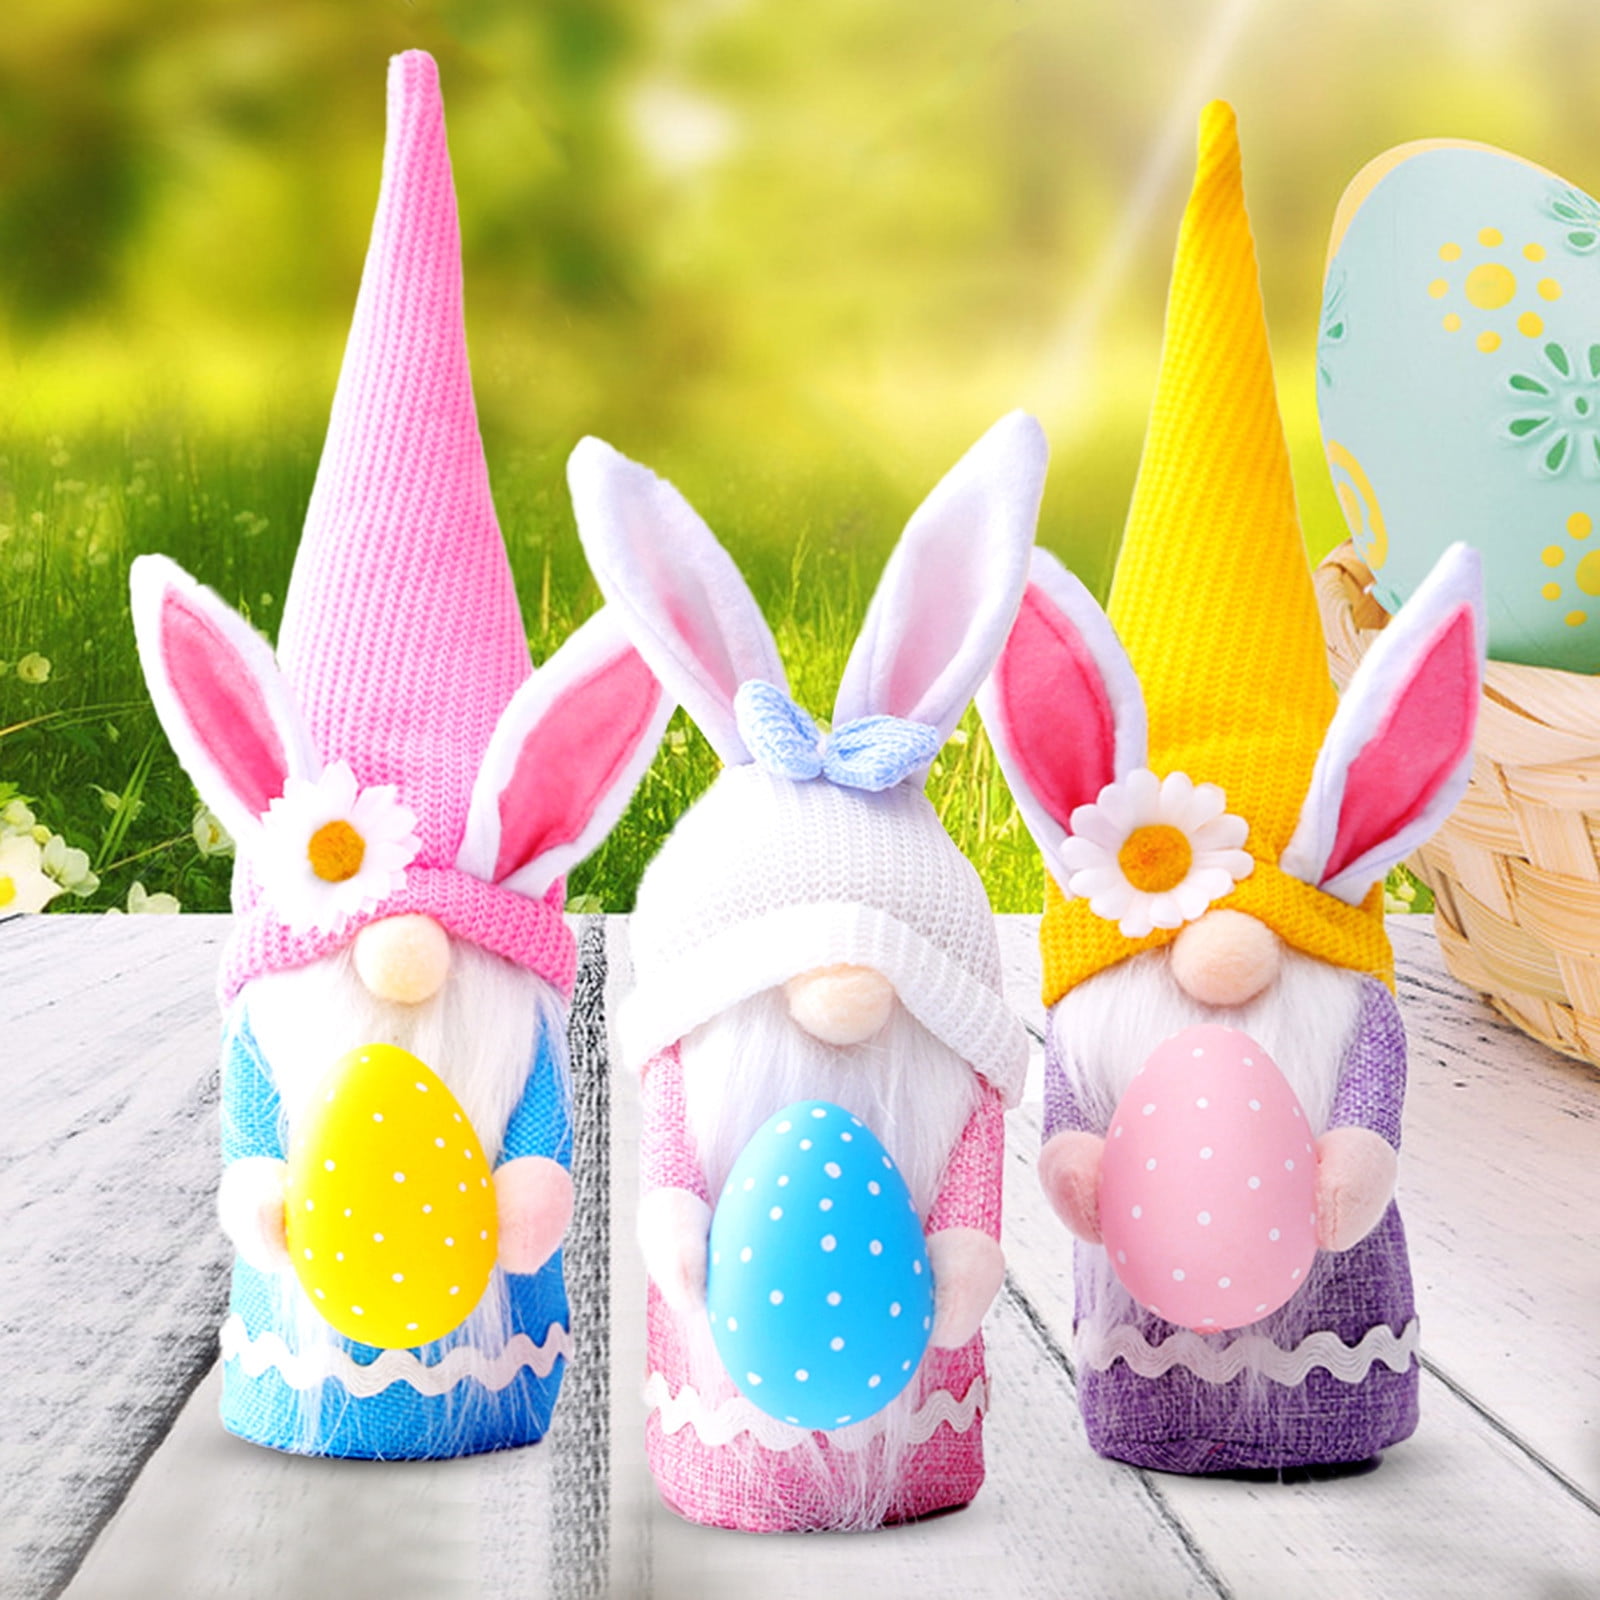 3PCS Easter Bunny Gnomes Plush Doll,Easter Bunny Carrot Dwarf Faceless Doll,Warm Light Mini Rabbit Candy Jar Decoration Ornaments Ornaments,for Holiday Party Decor